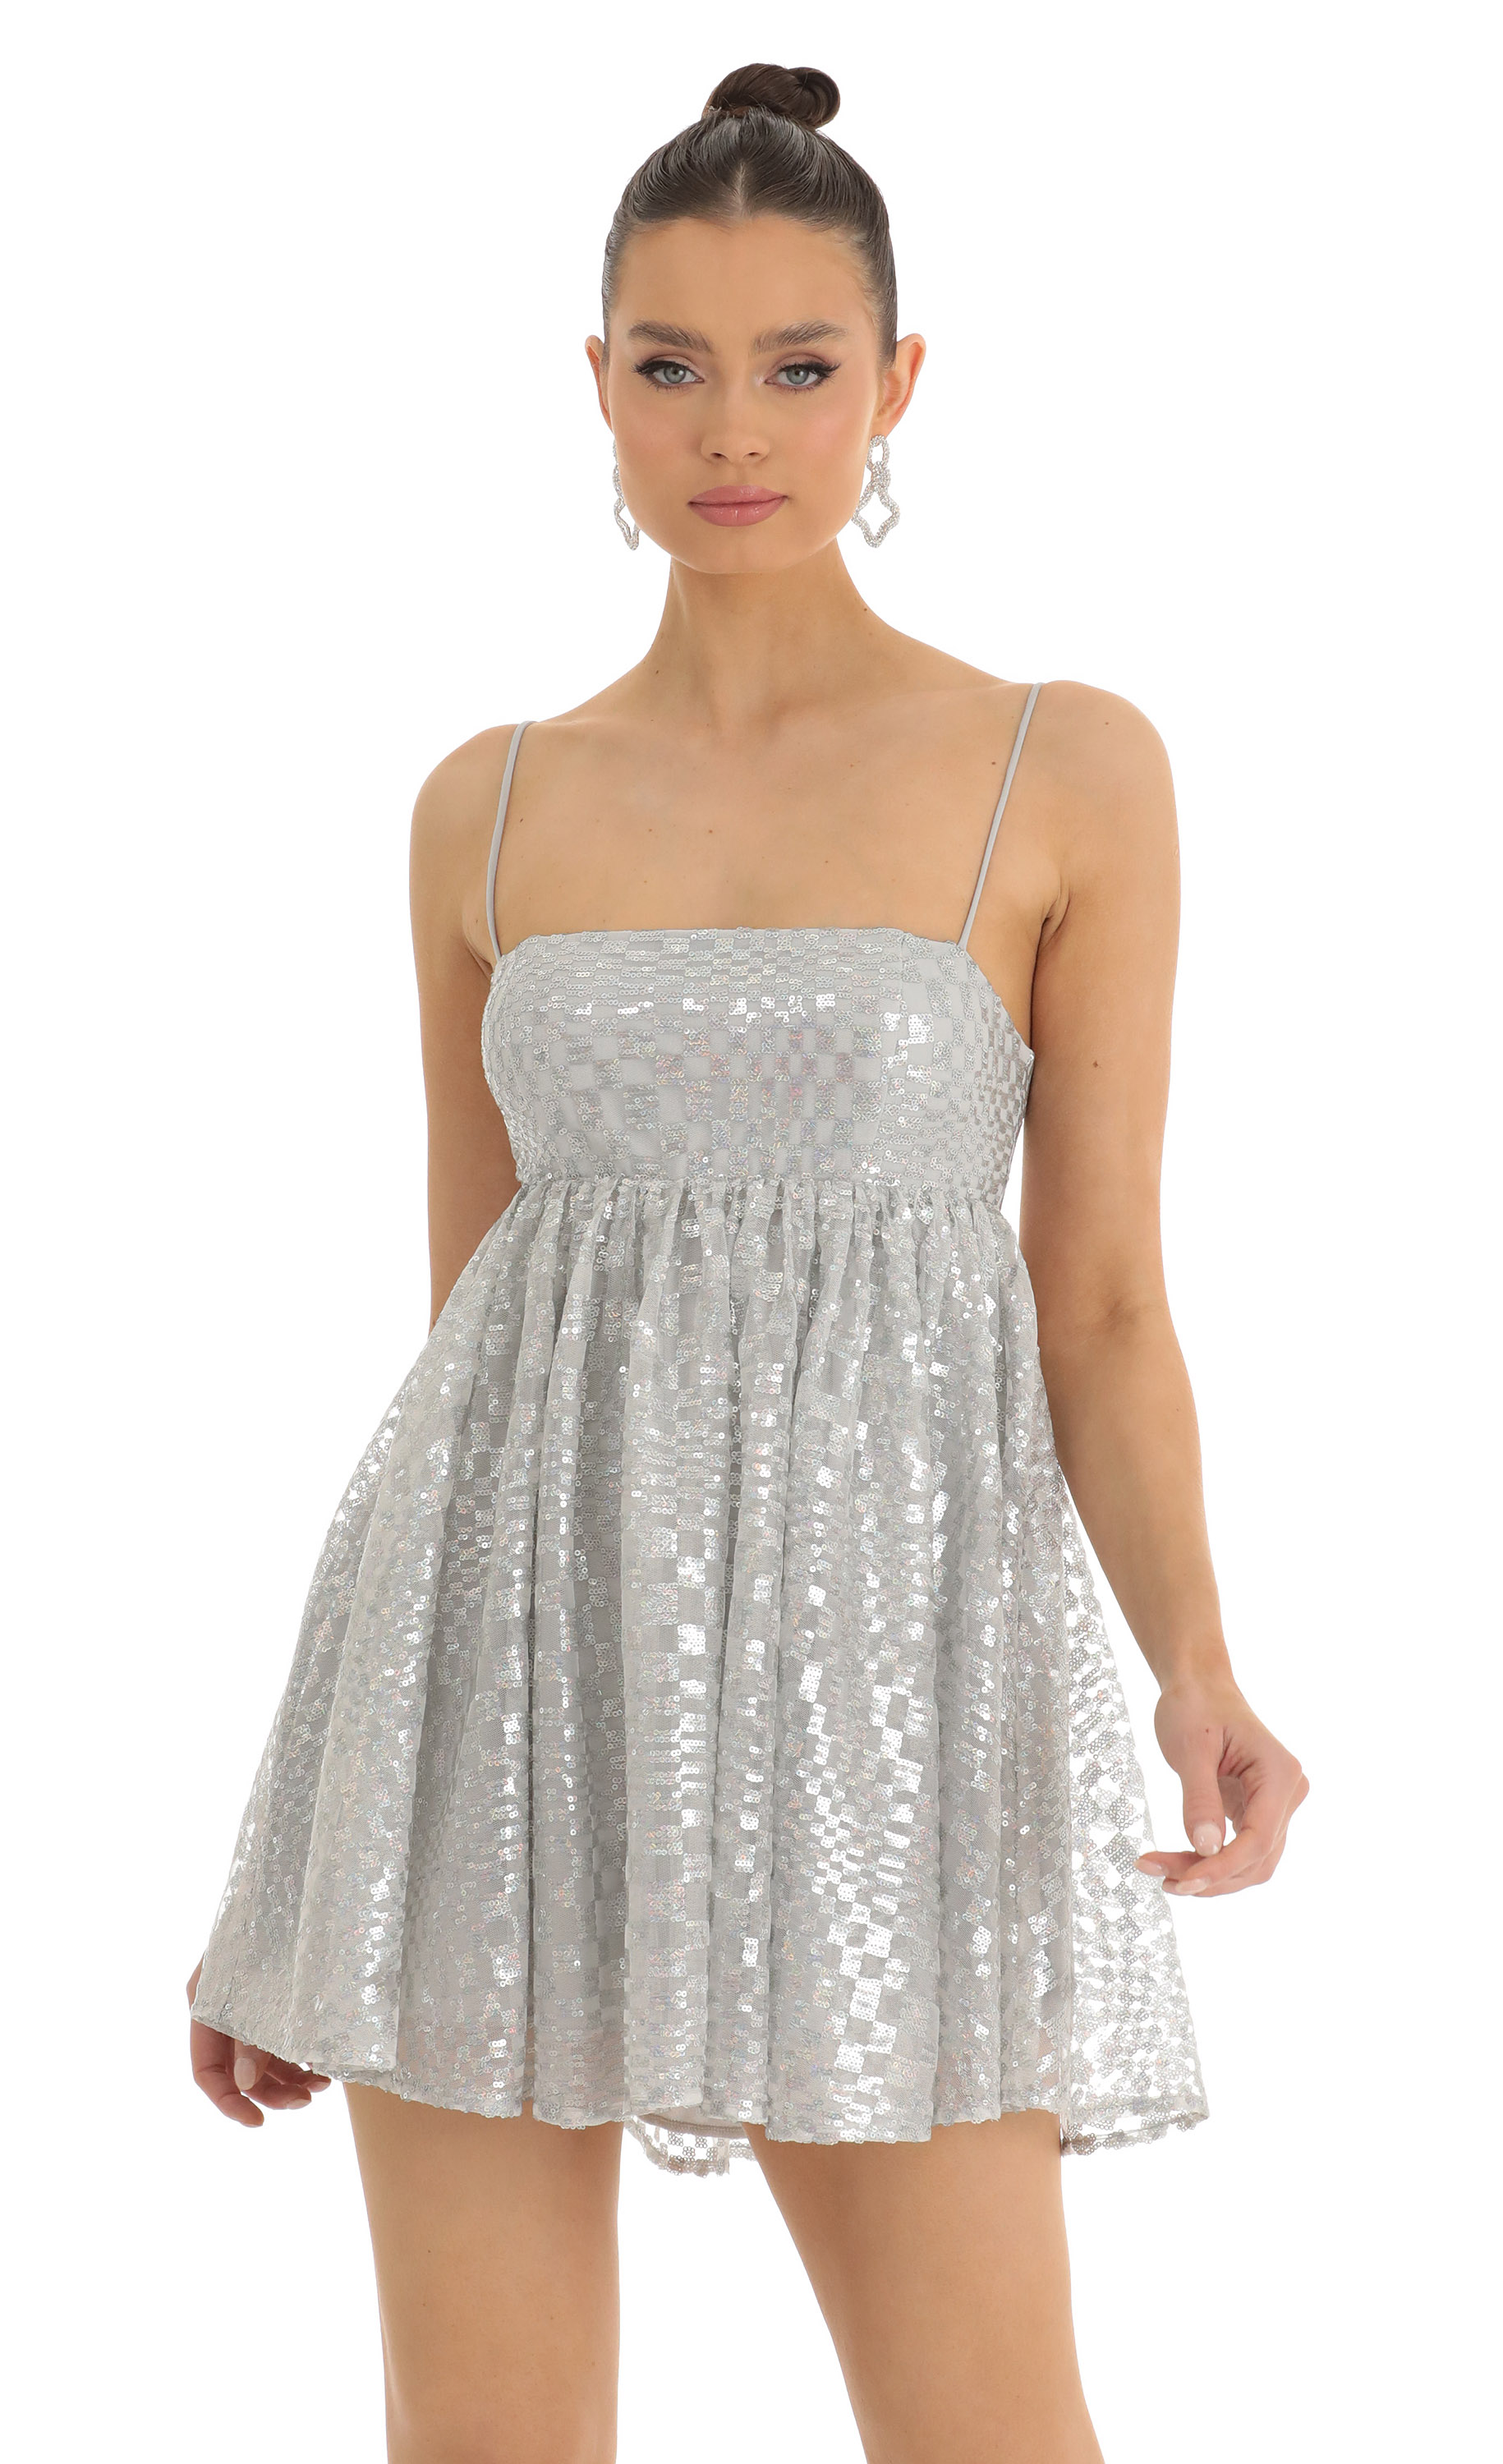 Checkered Sequin Baby Doll Dress in Silver